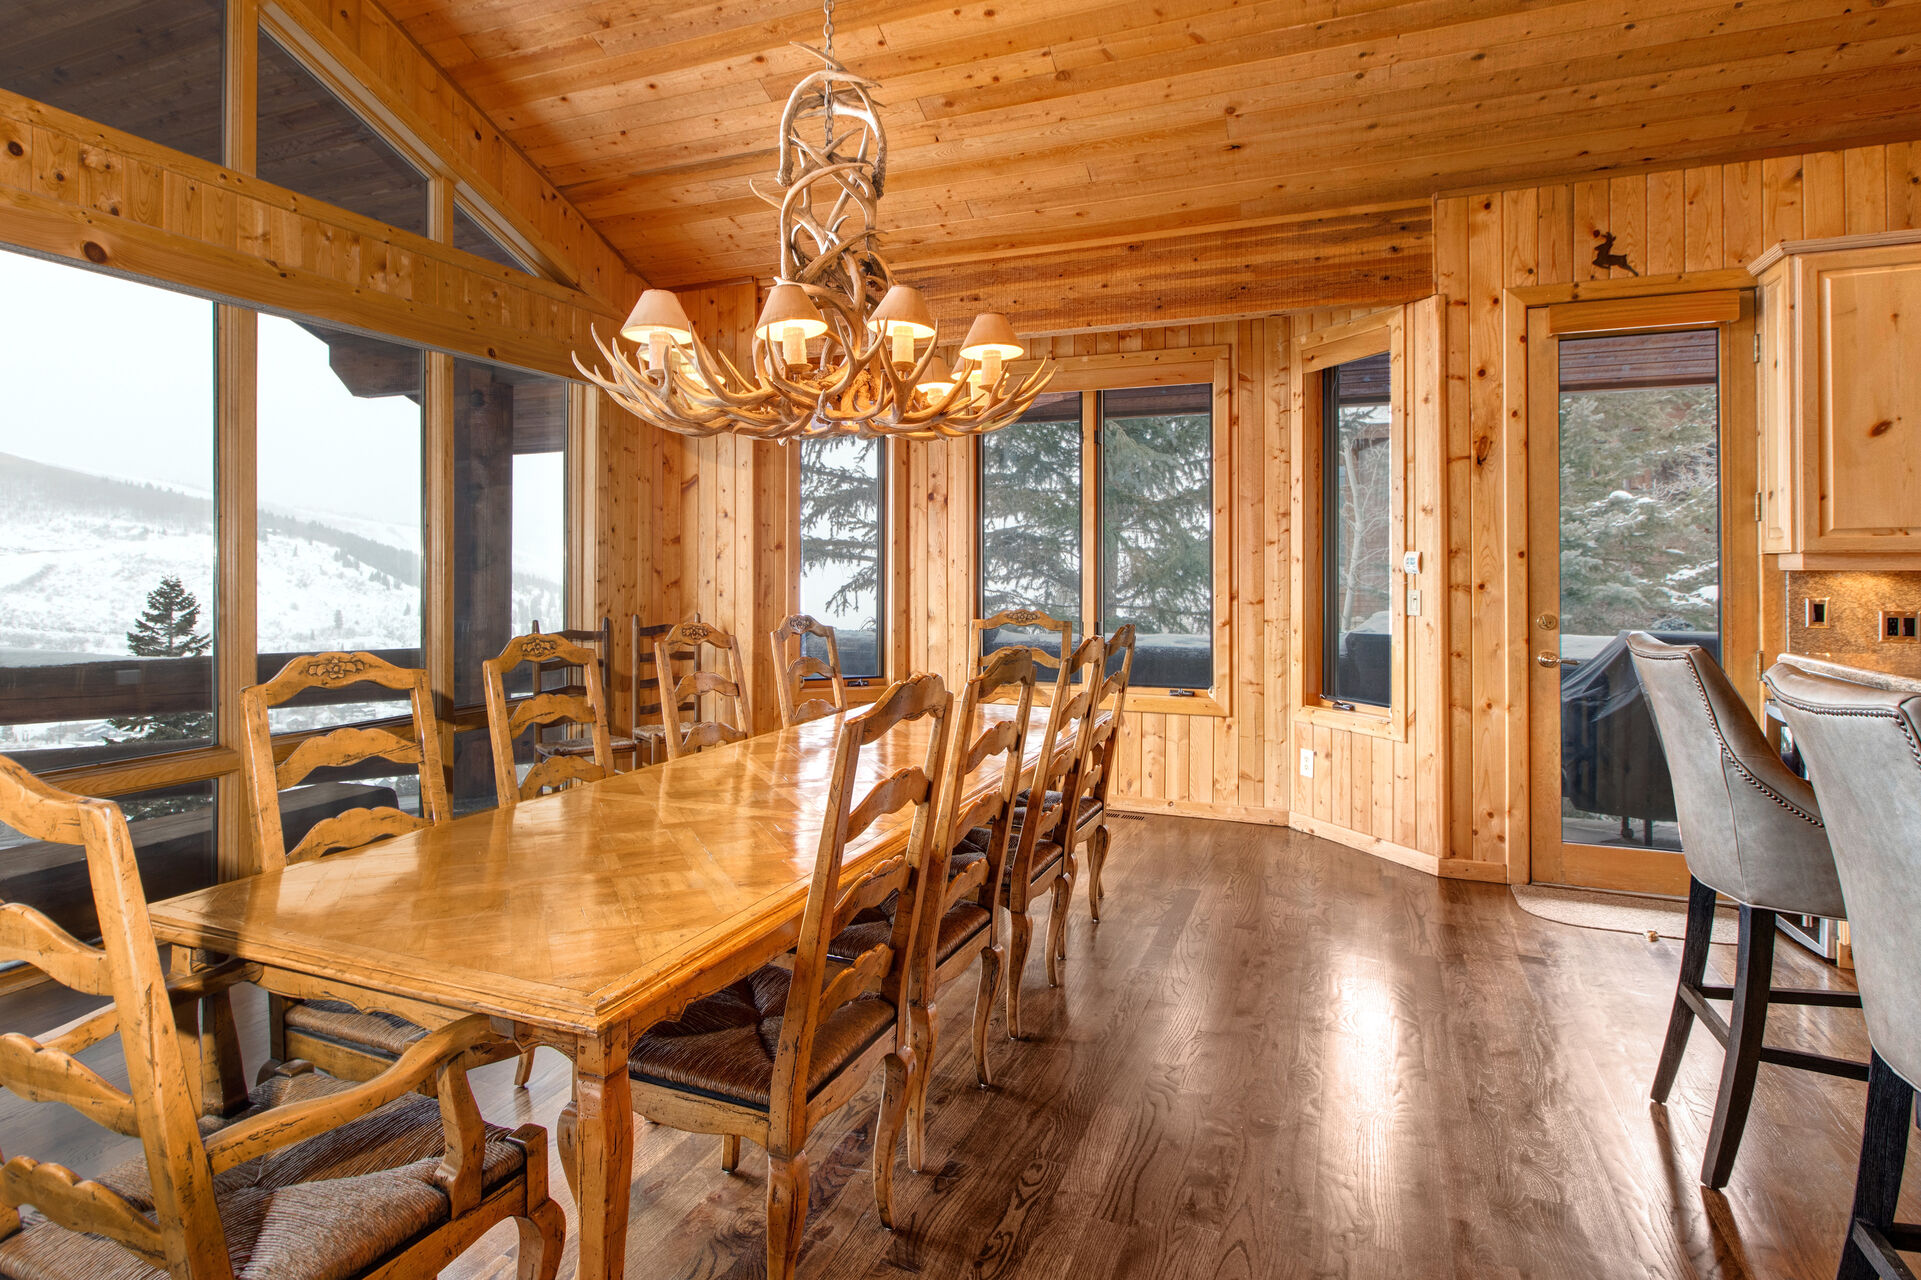 Floor-to-Ceiling Windows for Plenty of Natural Light and a Side Deck with a BBQ